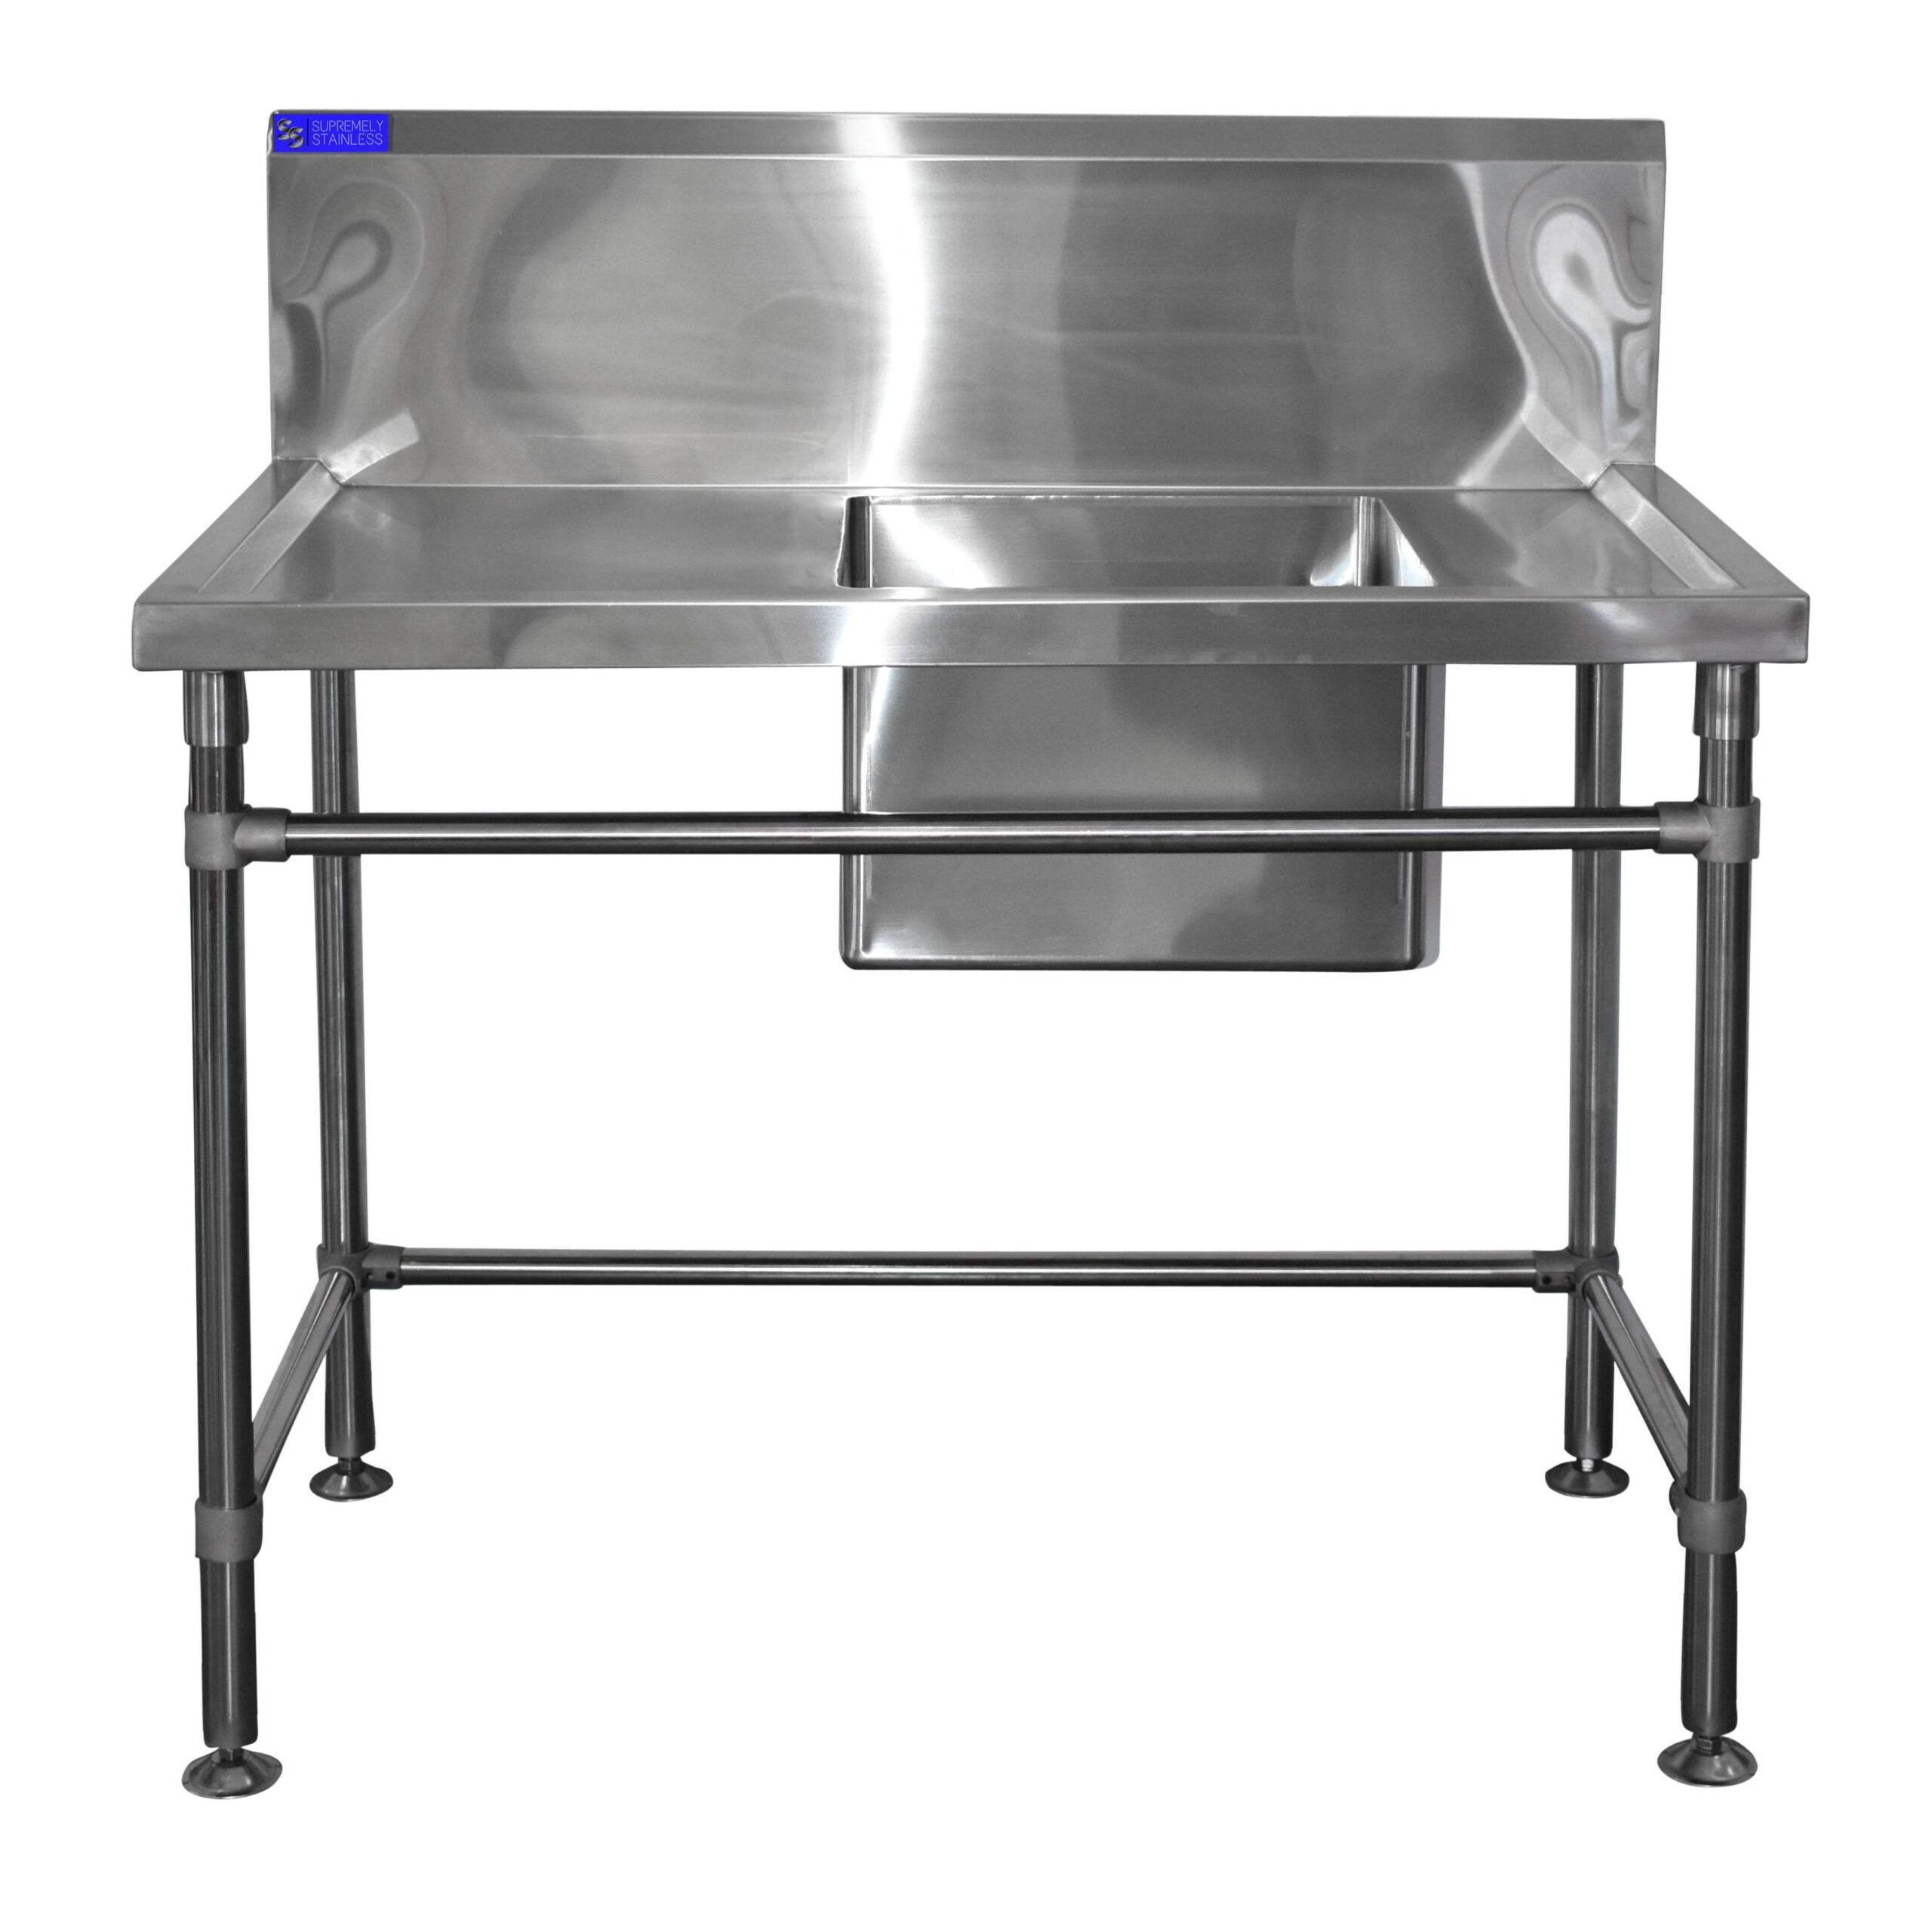 Stainless Steel Sink 700mm x 1800mm Single Bowl